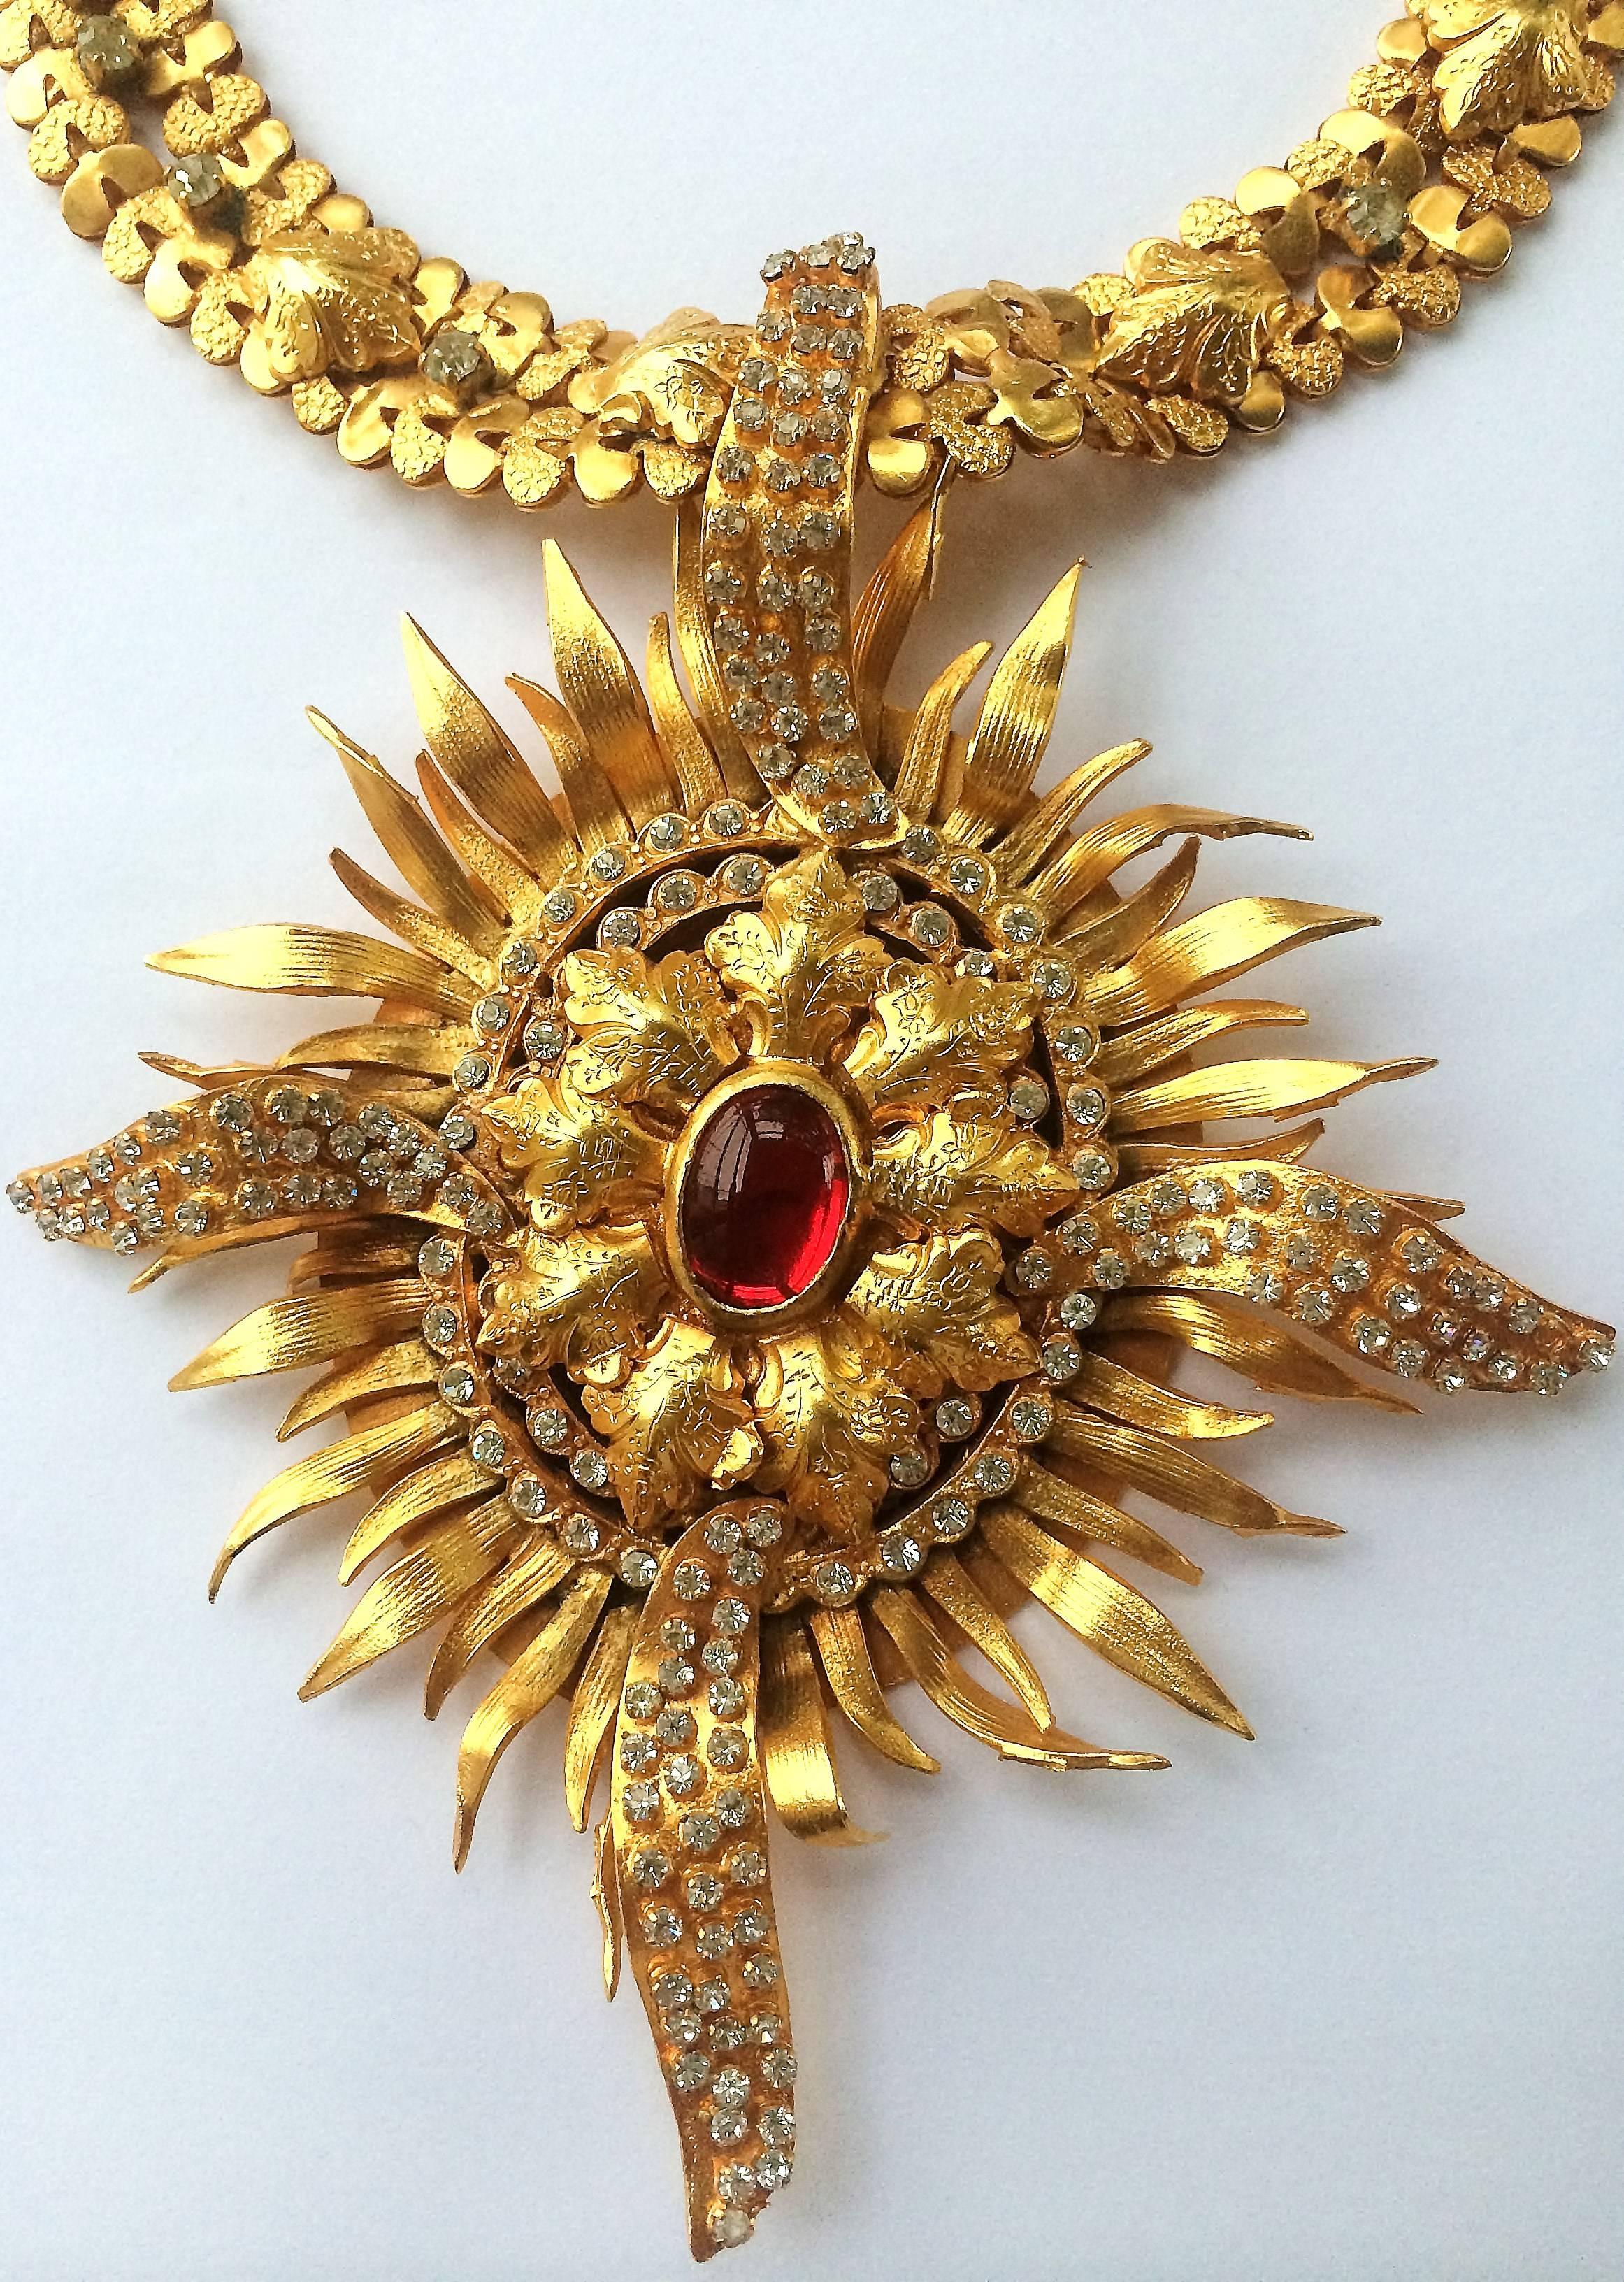 This is a rare, handmade French necklace in gilded worked metal with a sculptural twist to the 'flames'. The linked collar of alternating hammered and embossed/plain links highlighted with a gilded leaf motif and white paste. 
The pendant has a